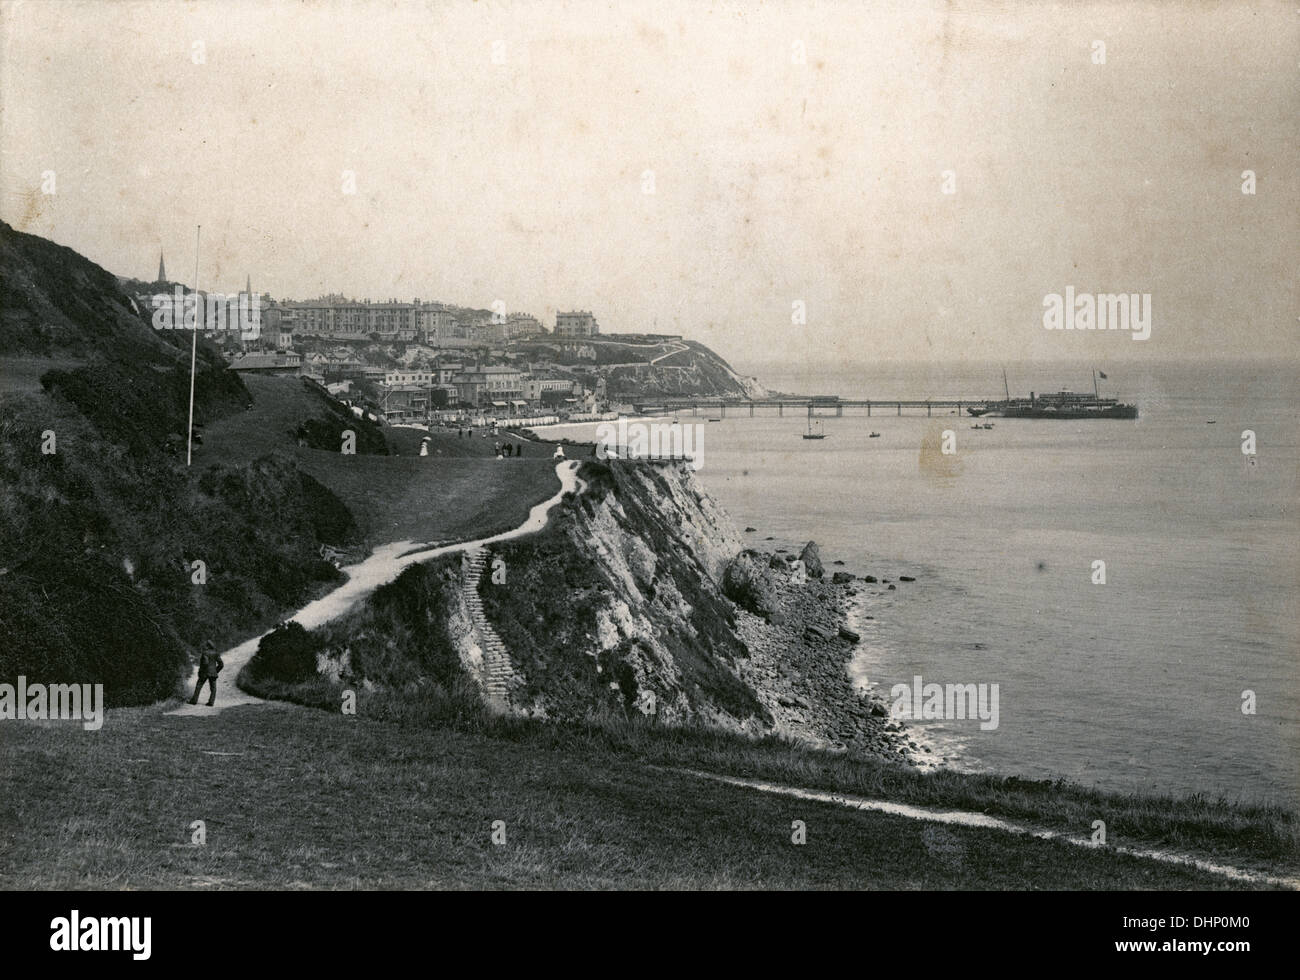 Antique photograph, circa 1890, footpath on the cliffs looking at Ventnor, Isle of Wight, England. Stock Photo